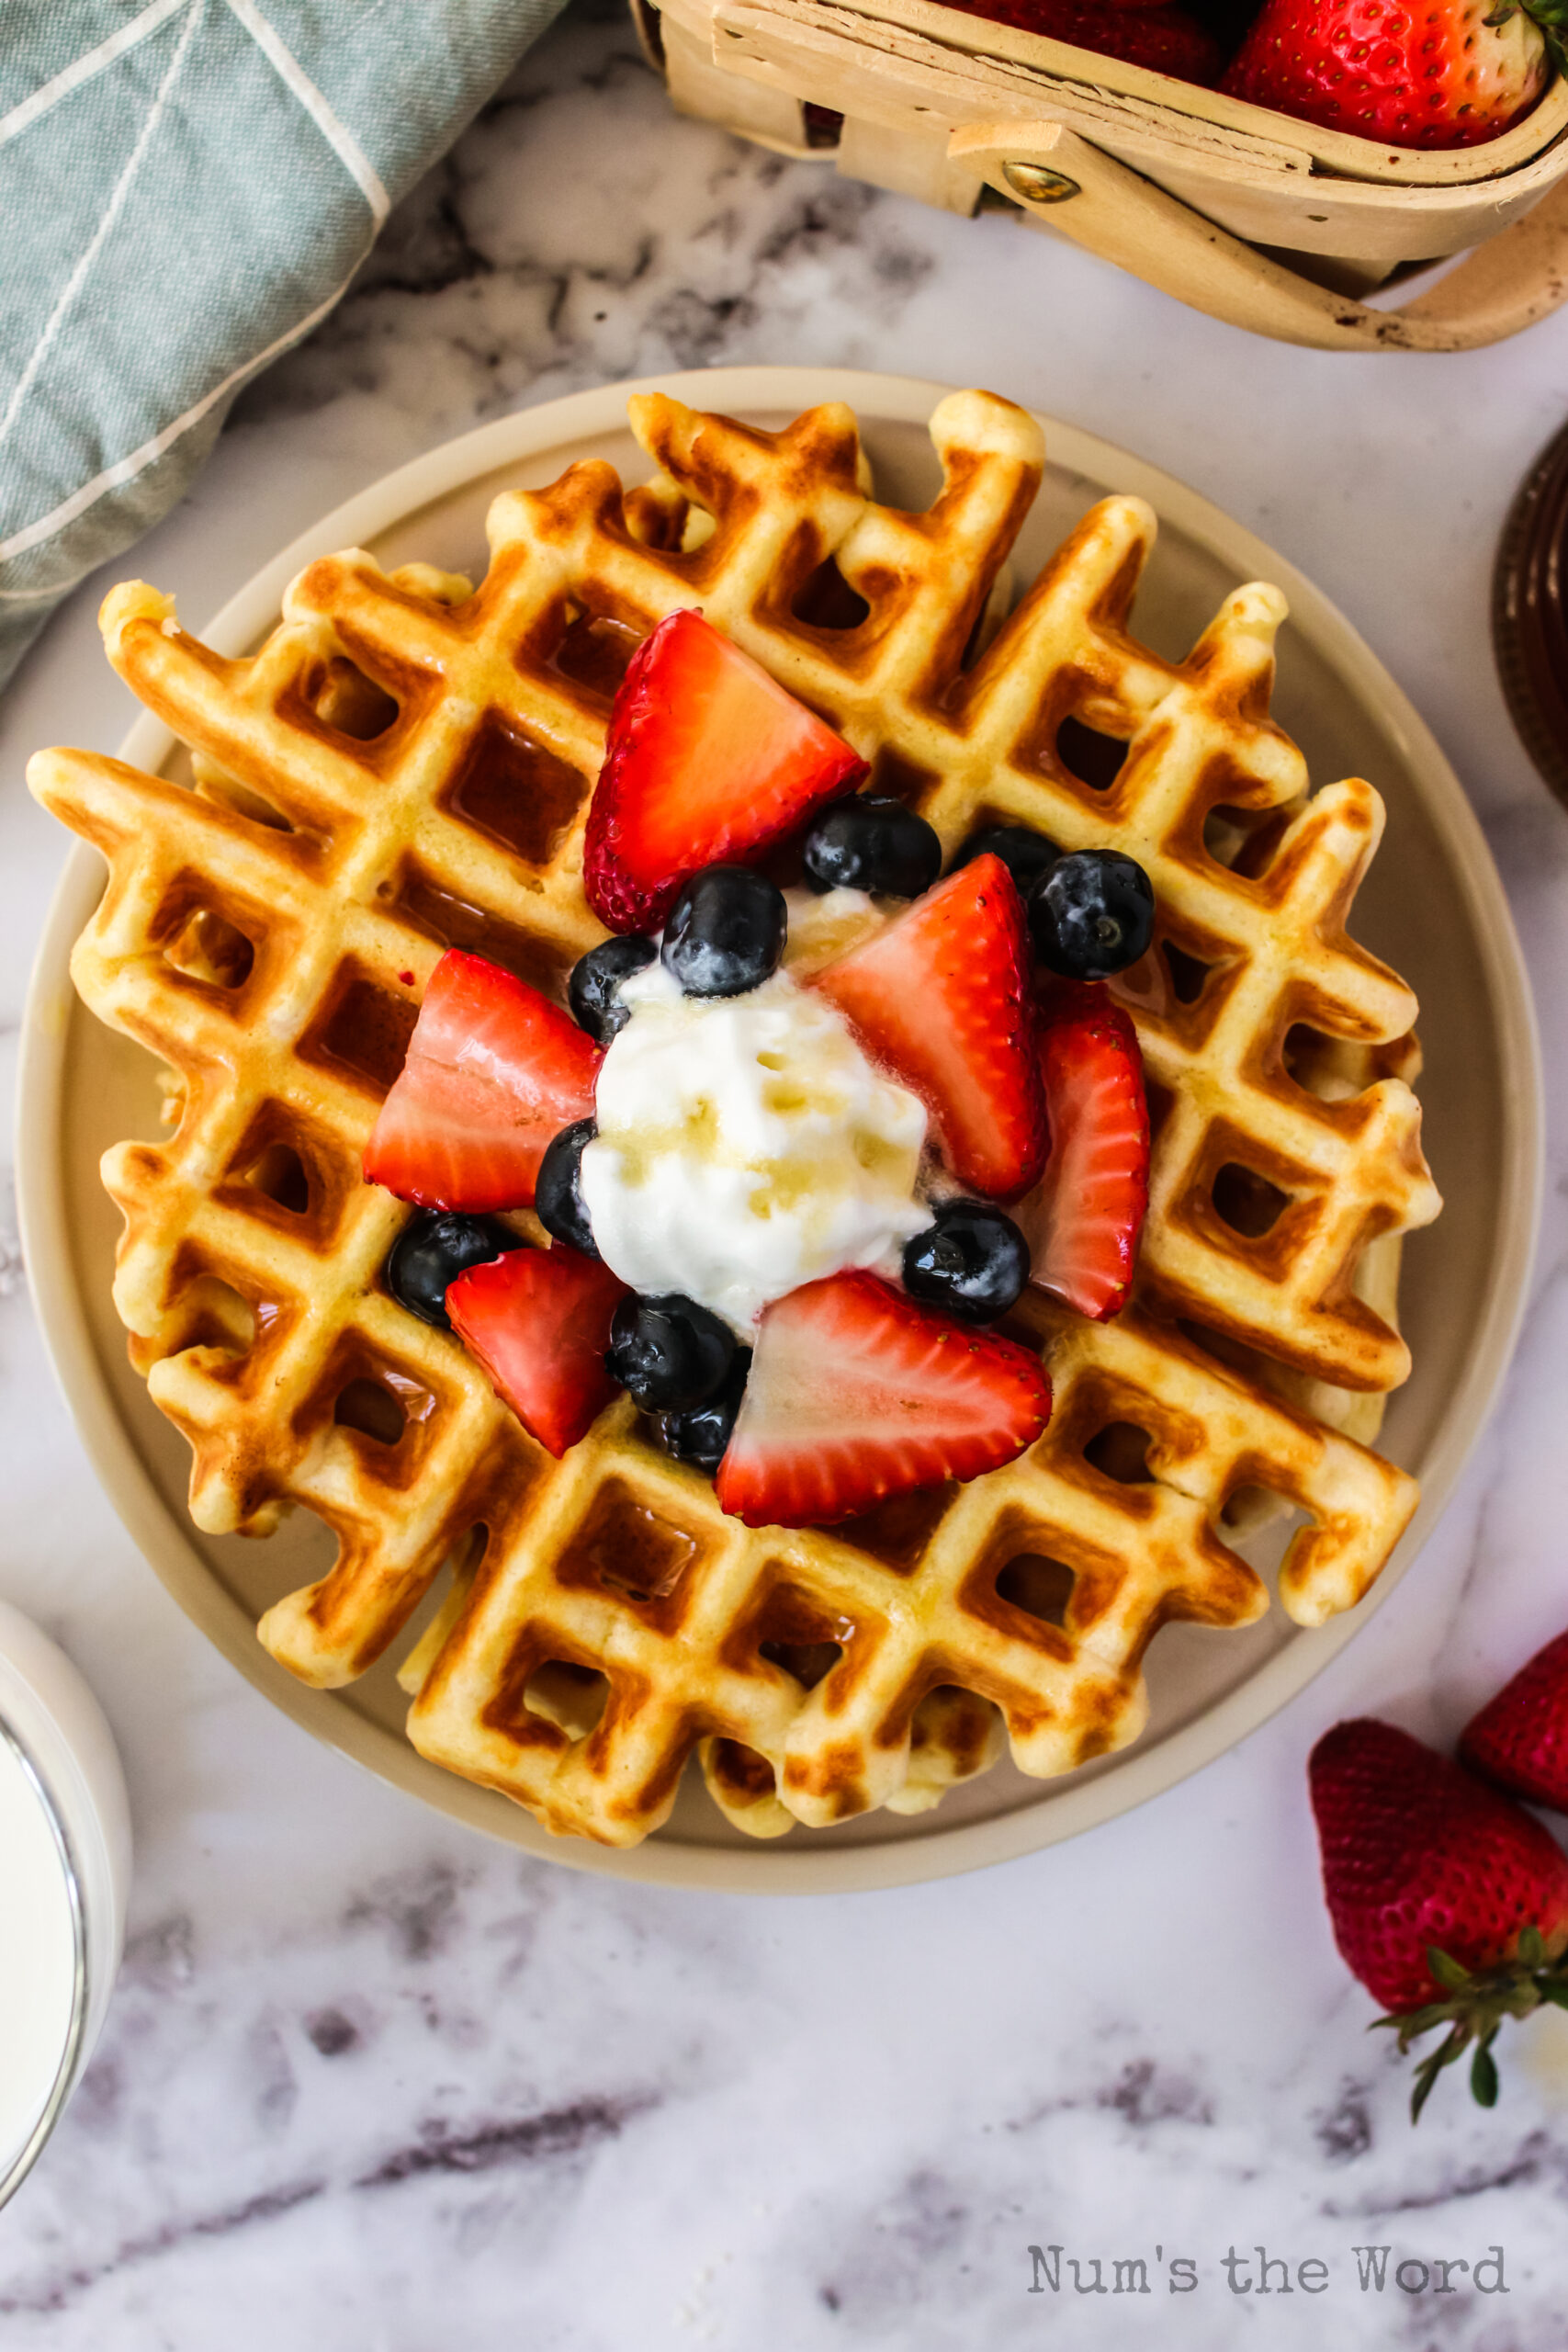 waffles on plate with fresh fruit and butter. Photo taken from the top looking down